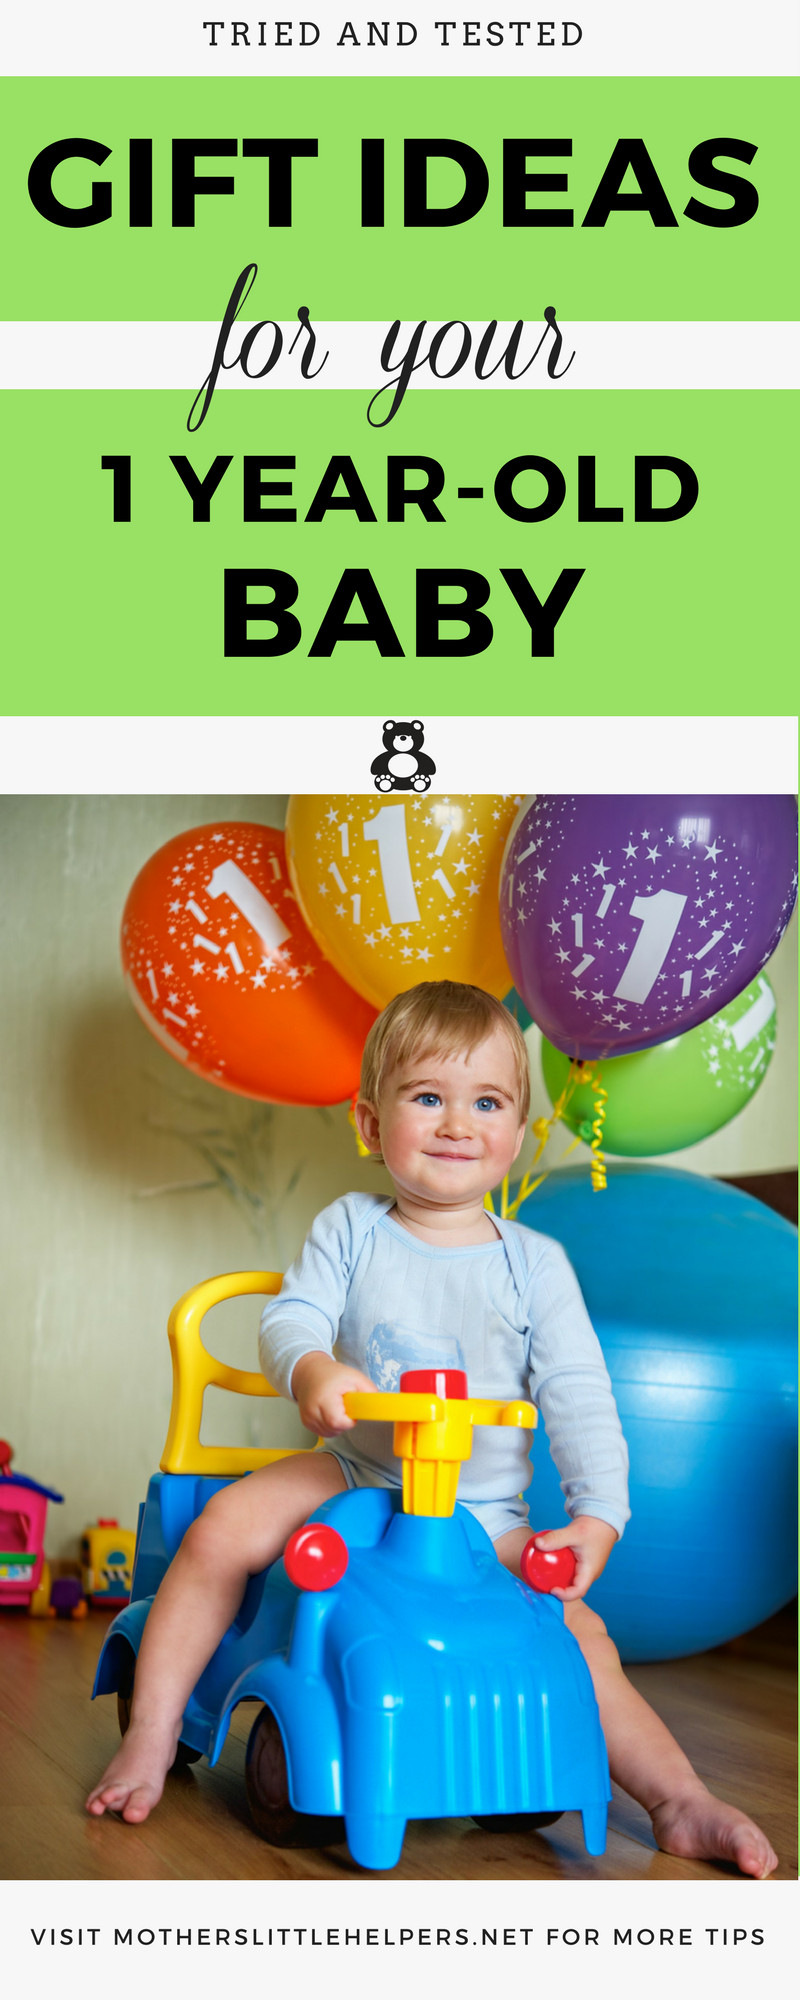 1 Year Baby Gifts
 Best Gift for e Year Old Baby Gift Guide 2019